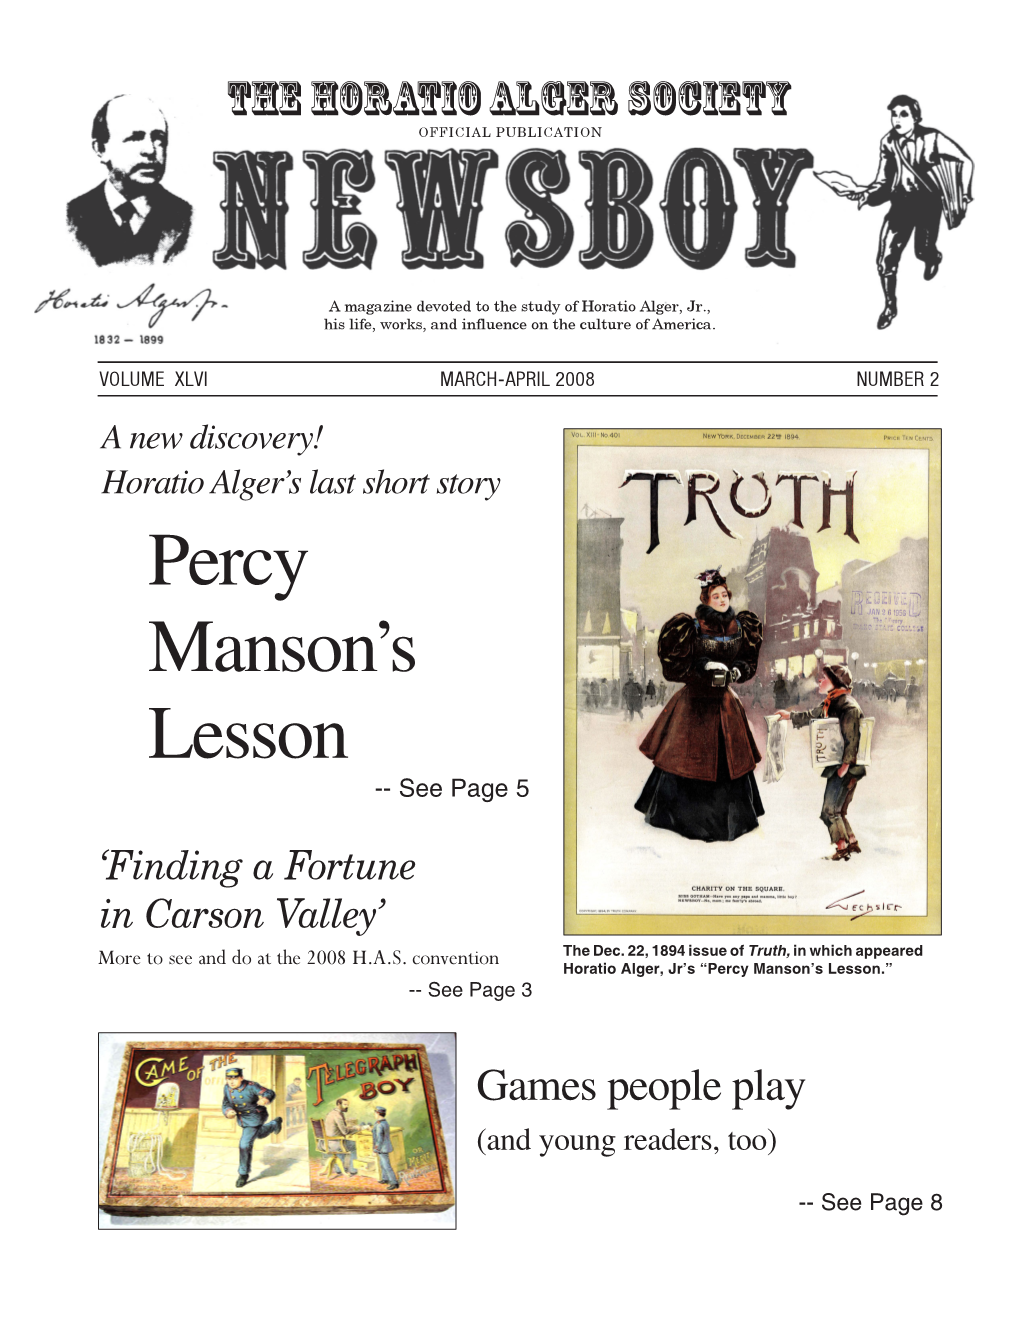 2008 March-April 2008 NEWSBOY Page 7